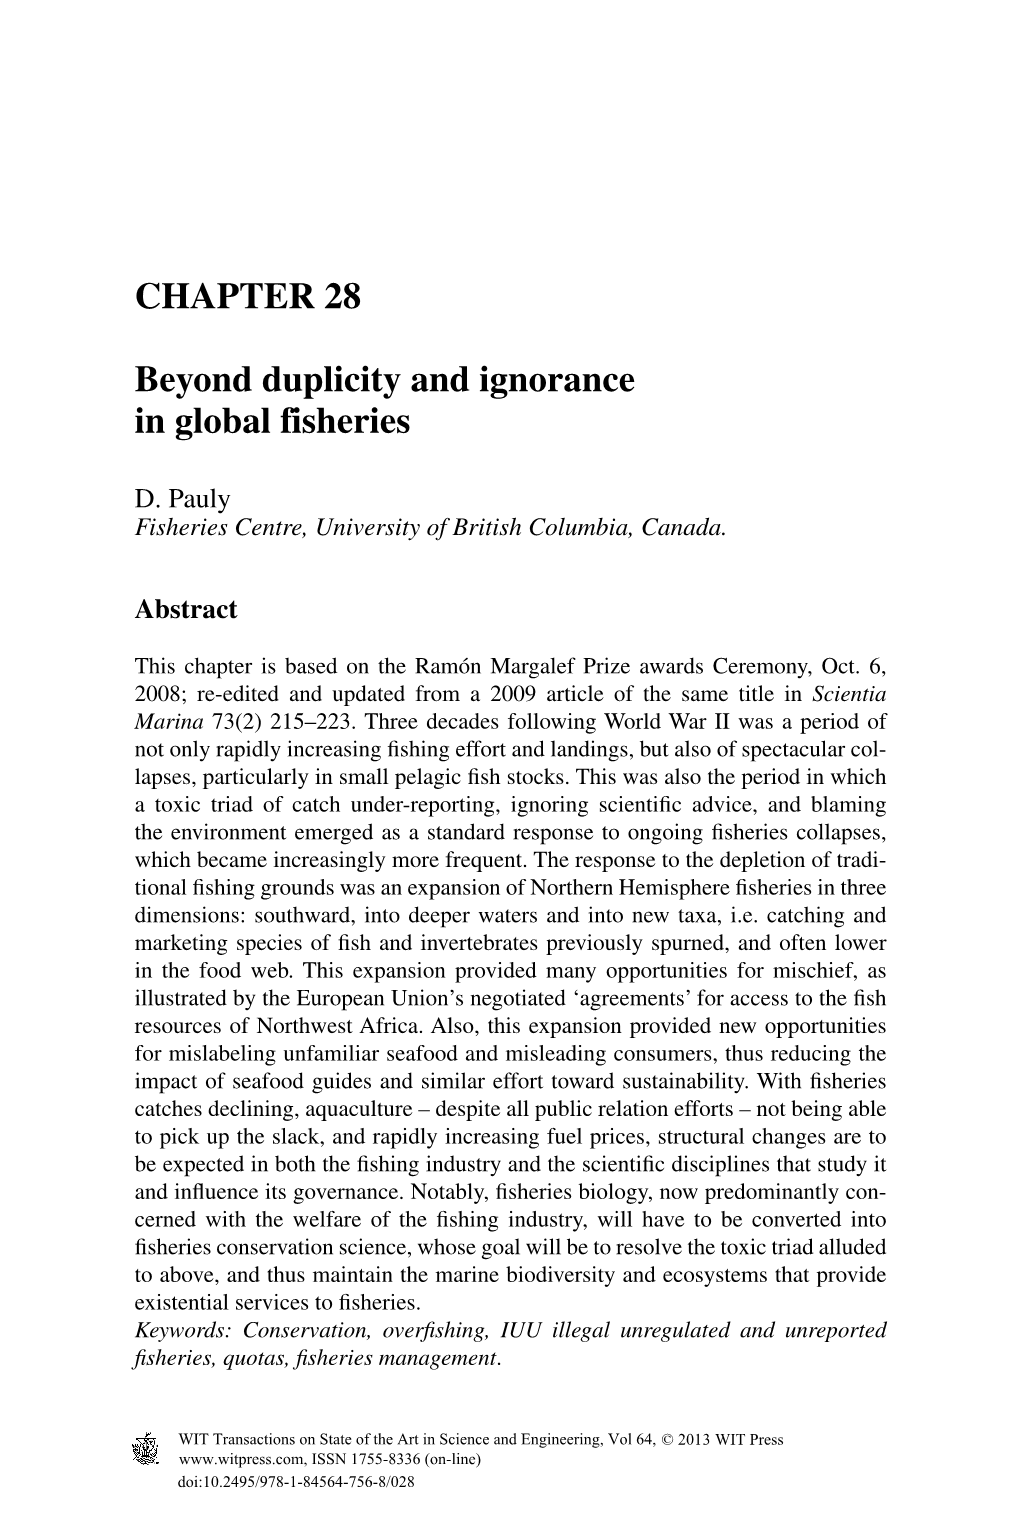 CHAPTER 28 Beyond Duplicity and Ignorance in Global Fisheries